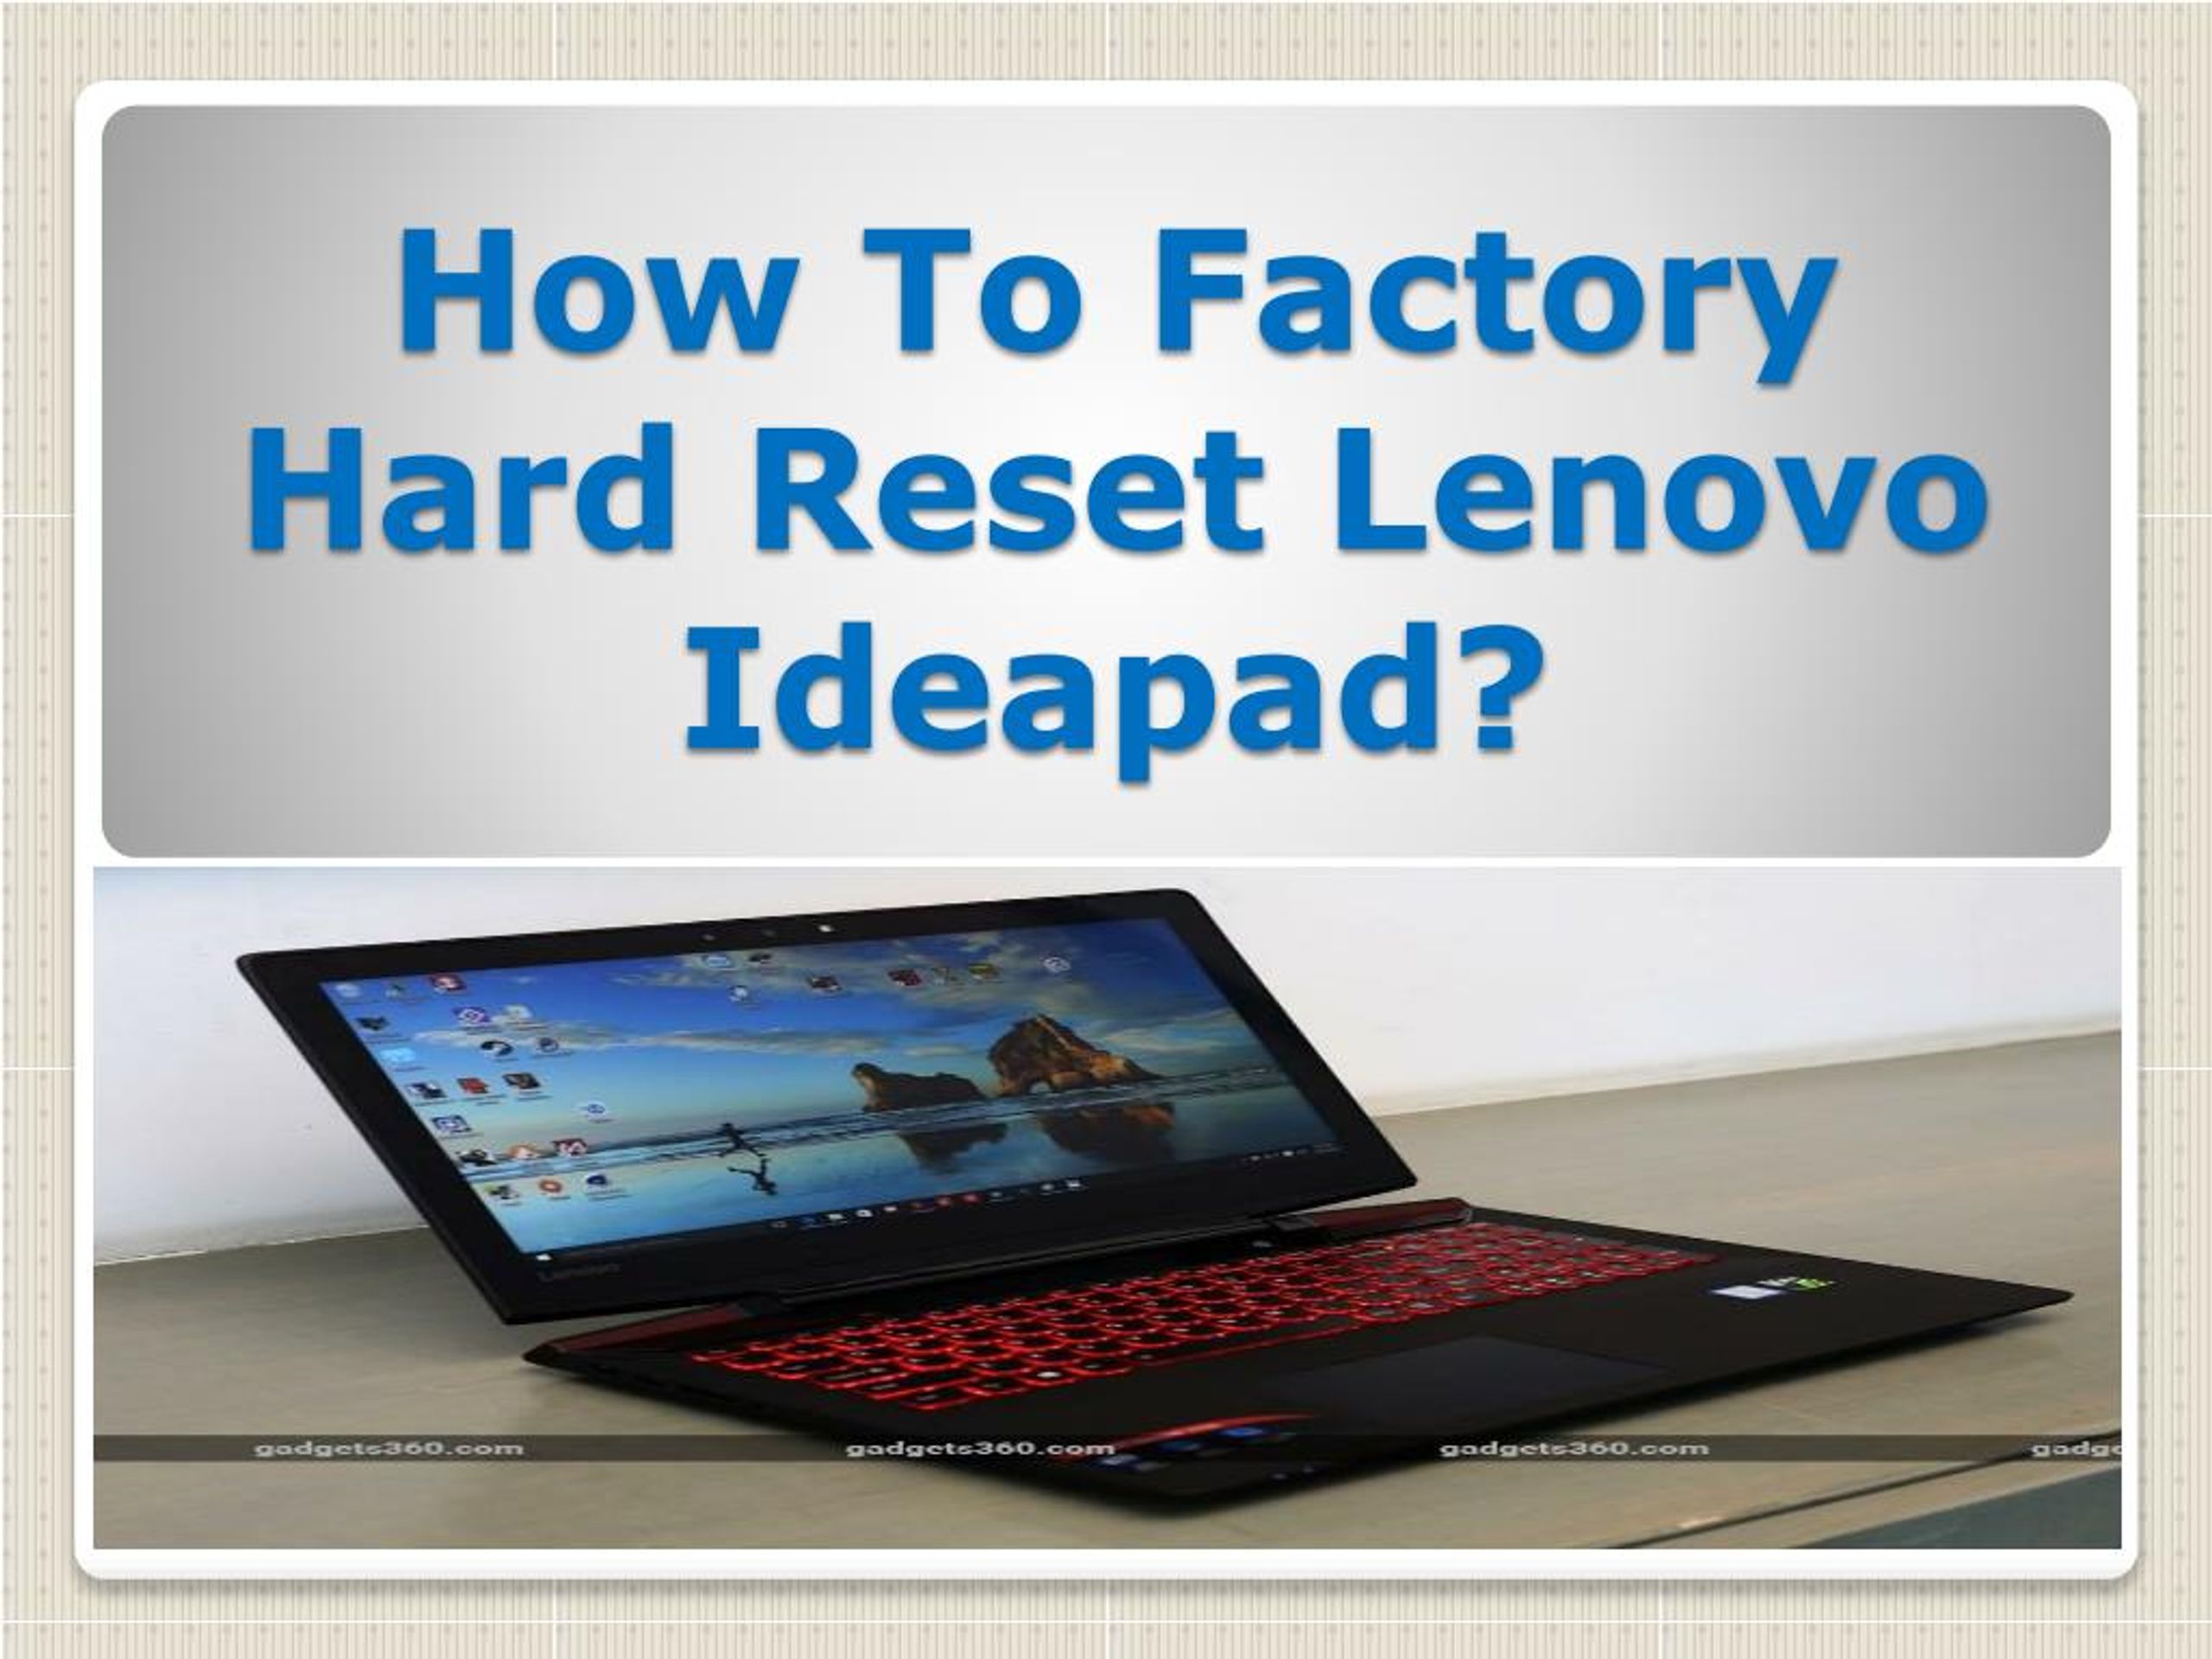 PPT - How To Factory Hard Reset Lenovo Ideapad? PowerPoint